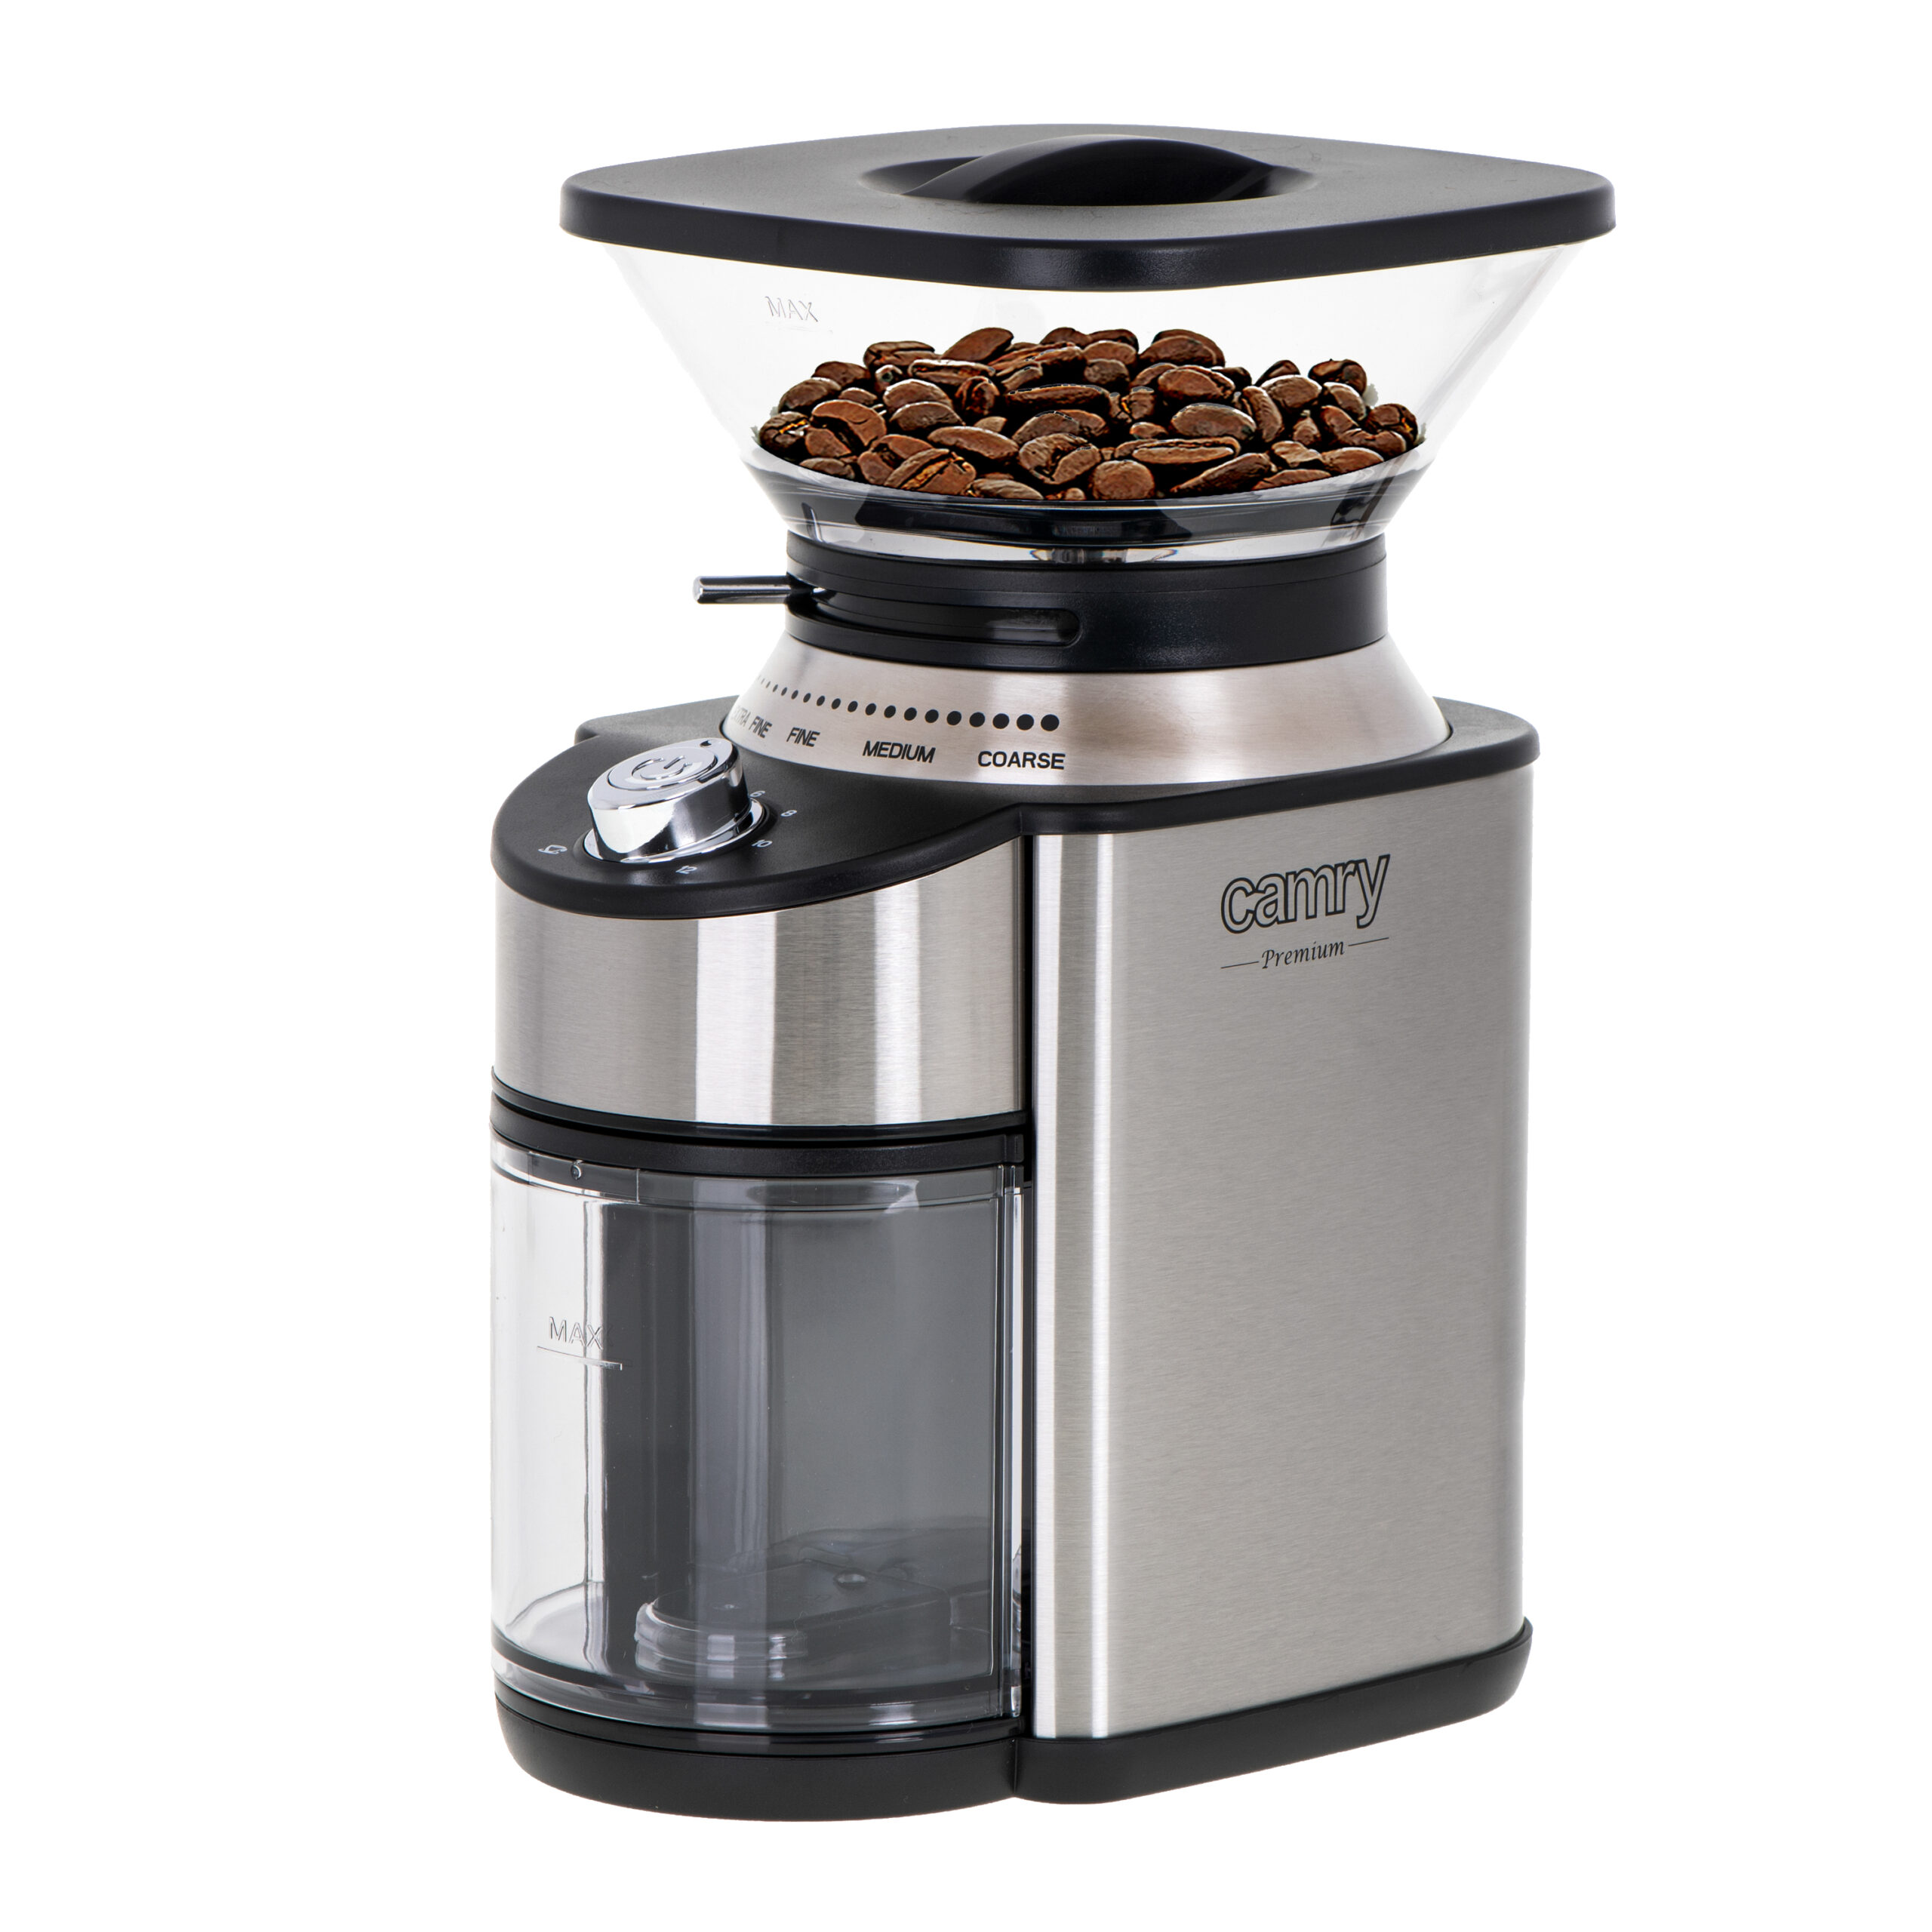 Camry CR 4443 Conical Burr Coffee grinder